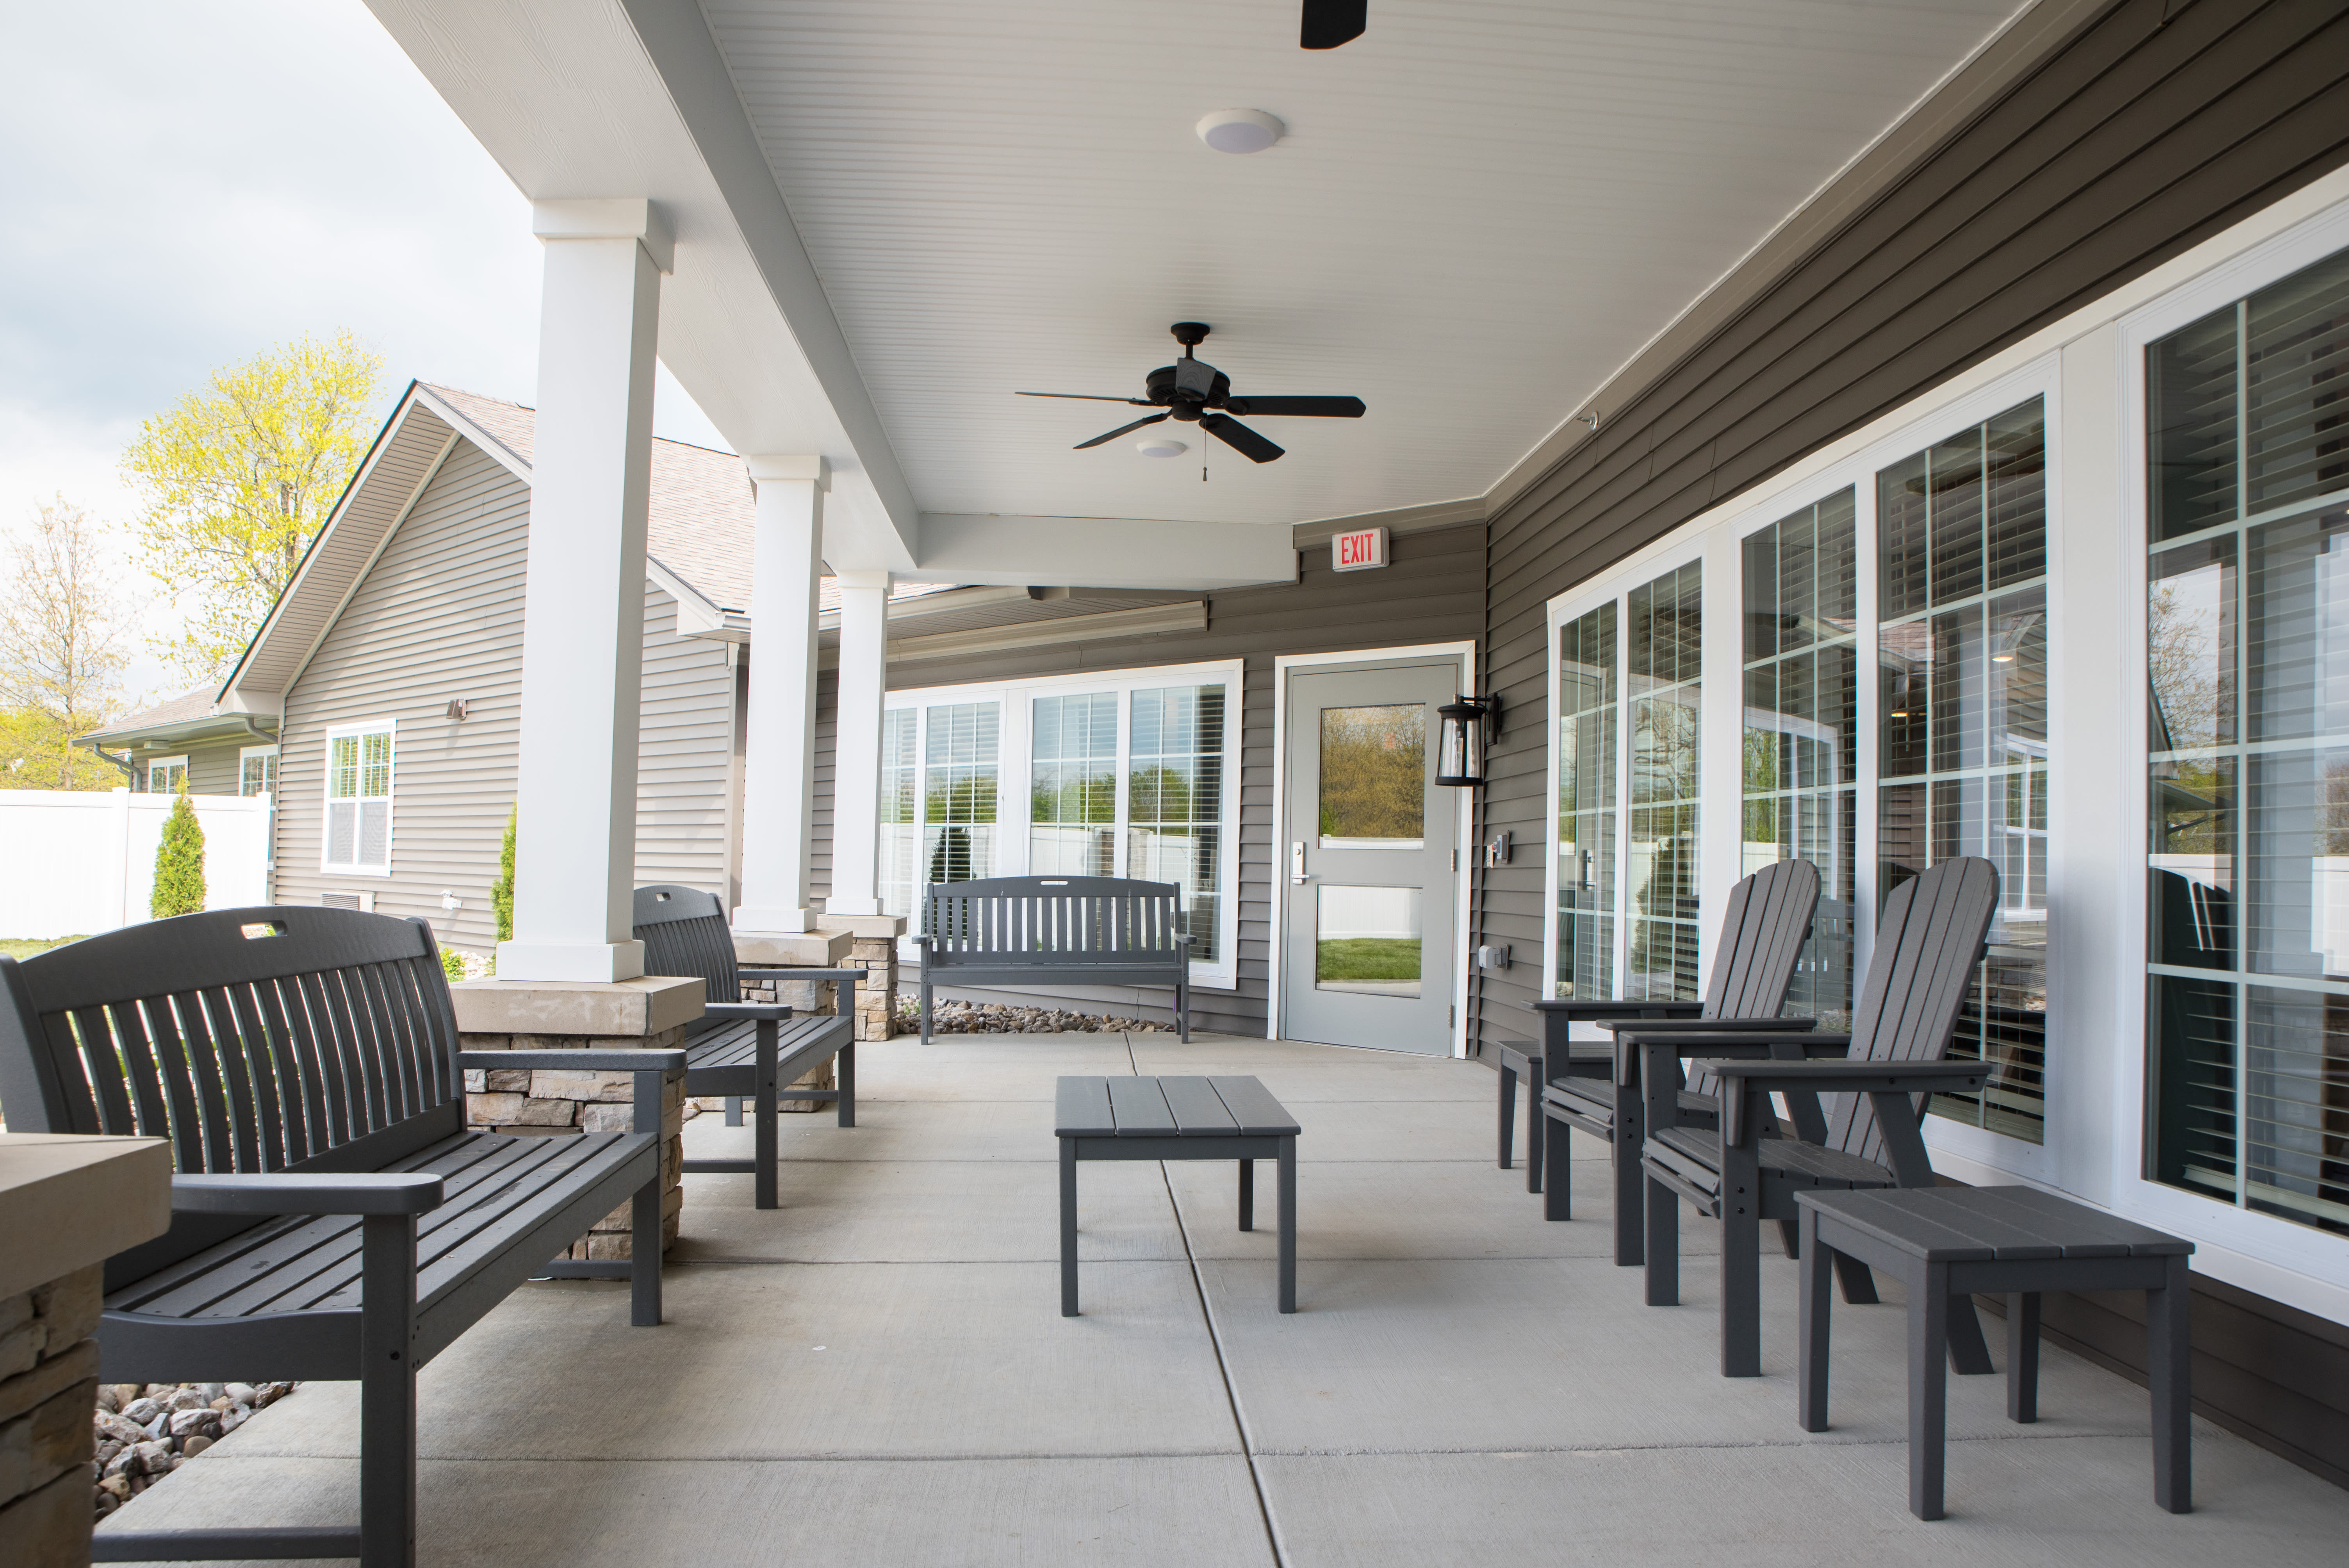 Outdoor lounge area at Shelby Farms Senior Living in Shelbyville, Kentucky